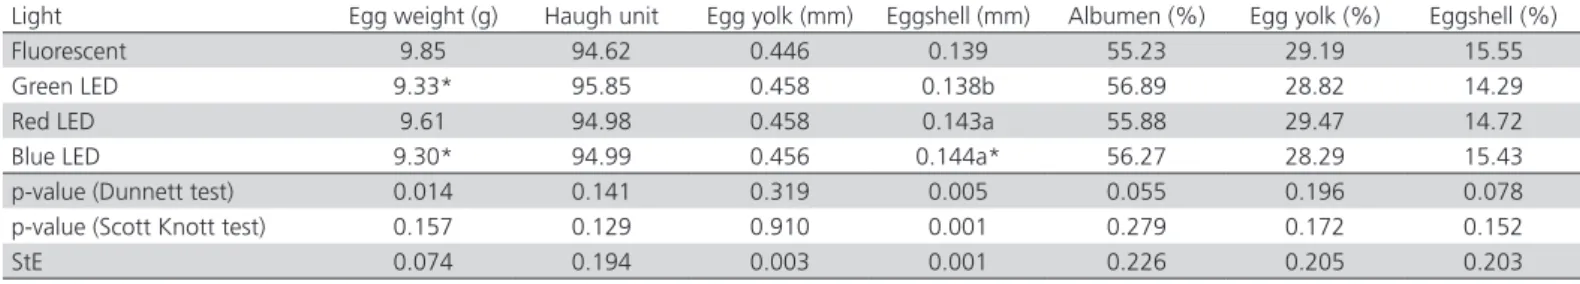 Table 3 – Mean values referent to biometrics of the  reproductive system of Japanese quails exposed to different  light sources at 57 days of age.